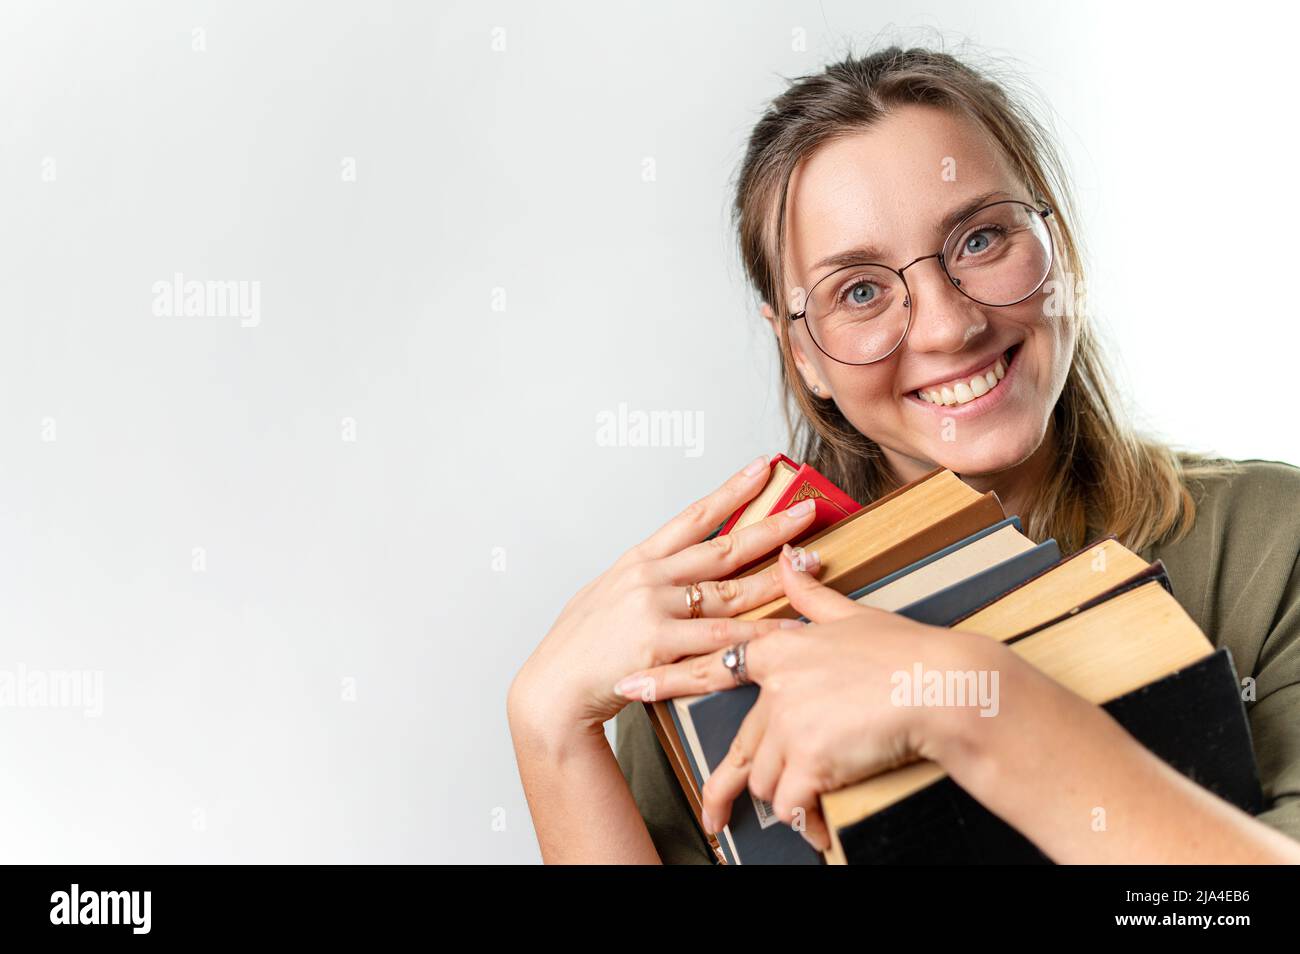 Young excited smiling woman student holding books by her face, white background Stock Photo